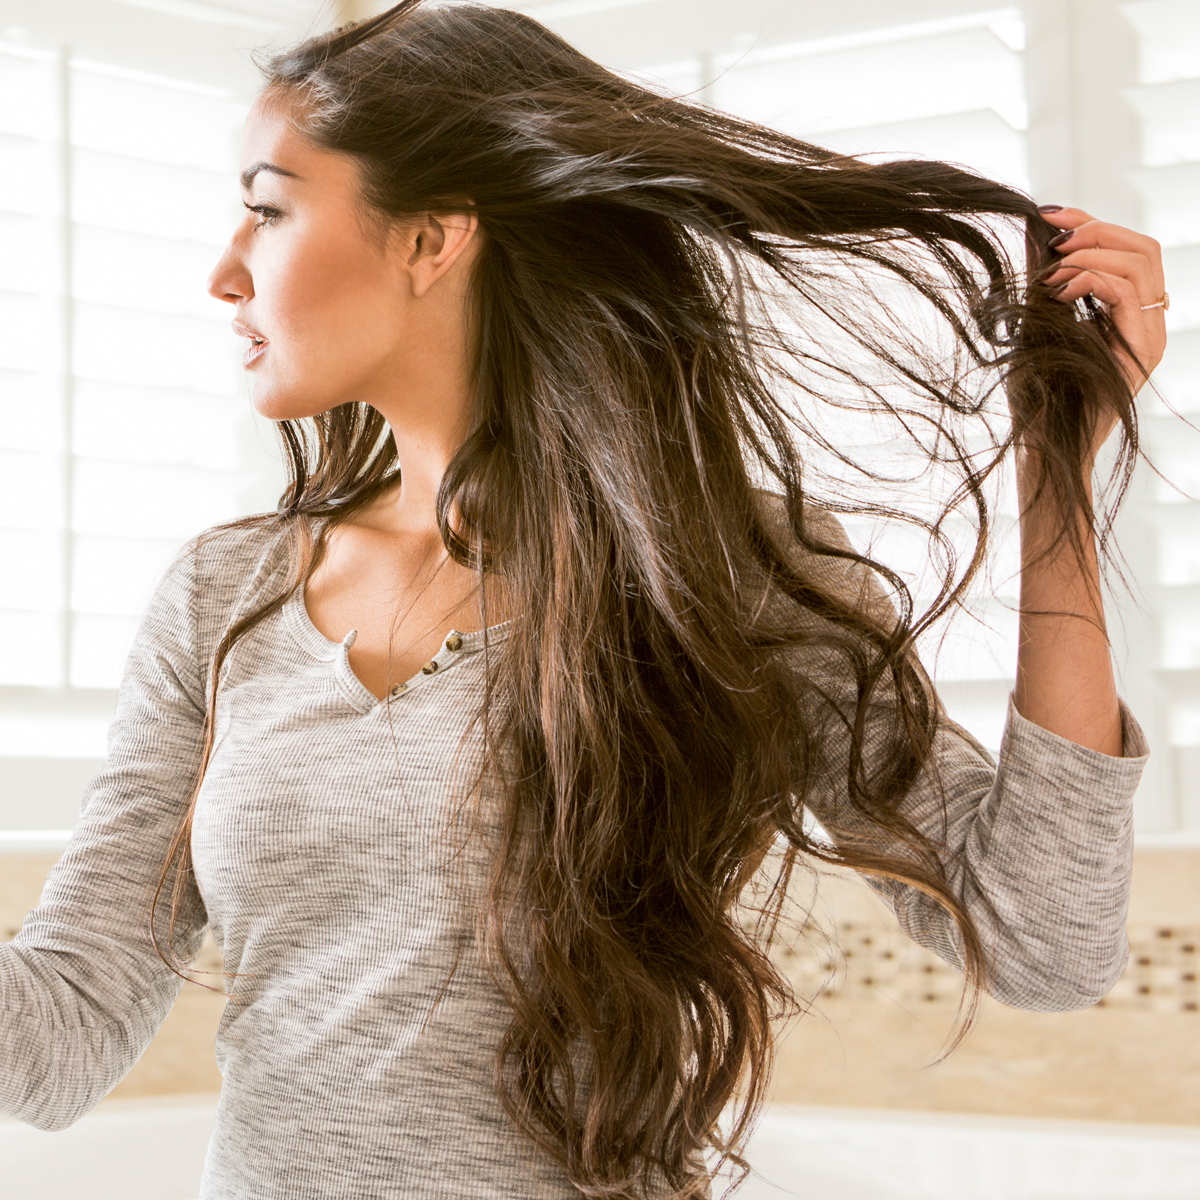 Amazon Shoppers Swear by These Hair Products to Simplify Their Routine